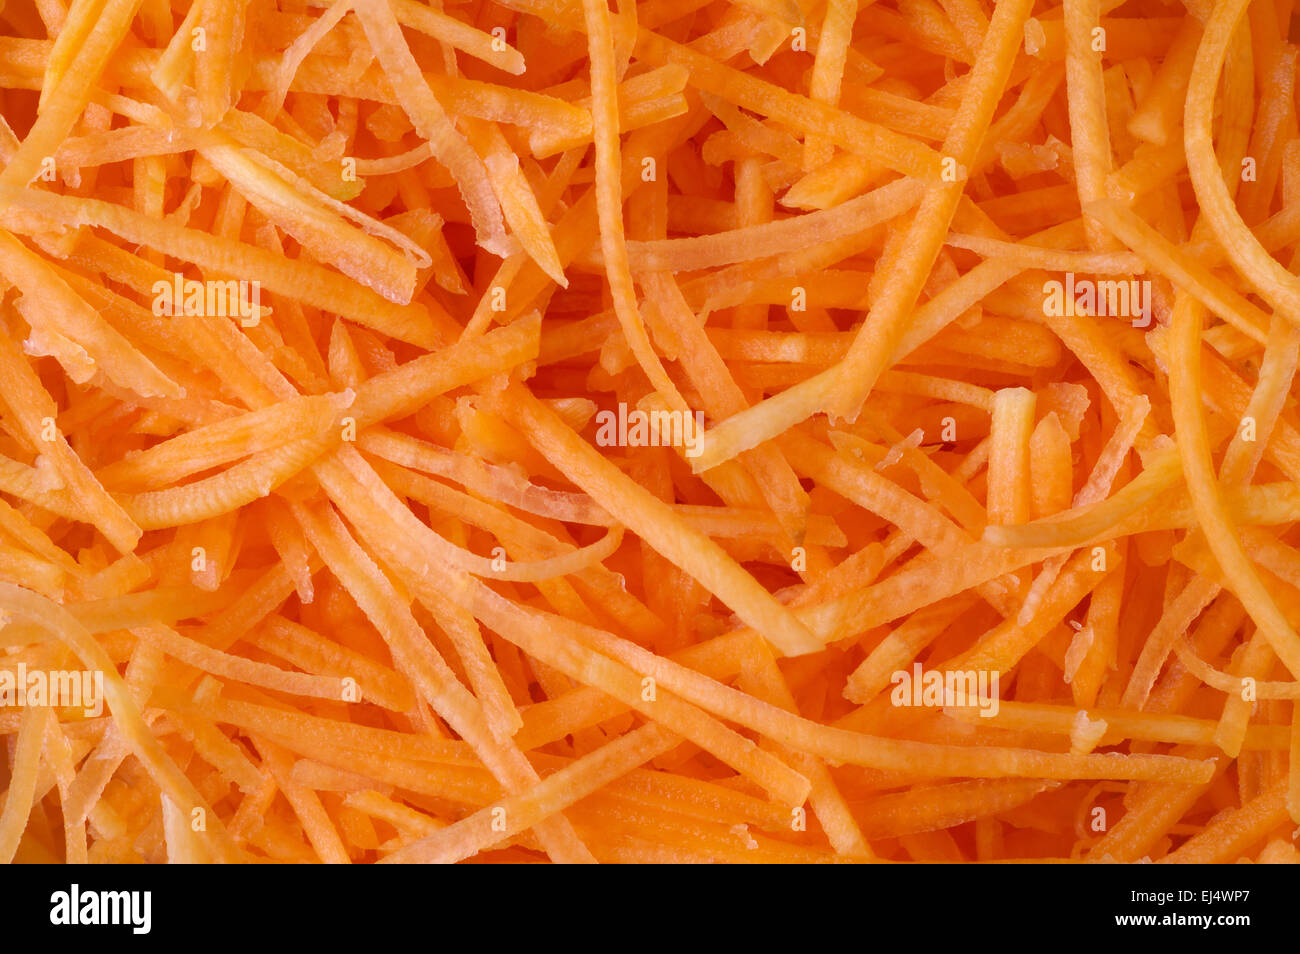 Carrots julienne texture background Stock Photo